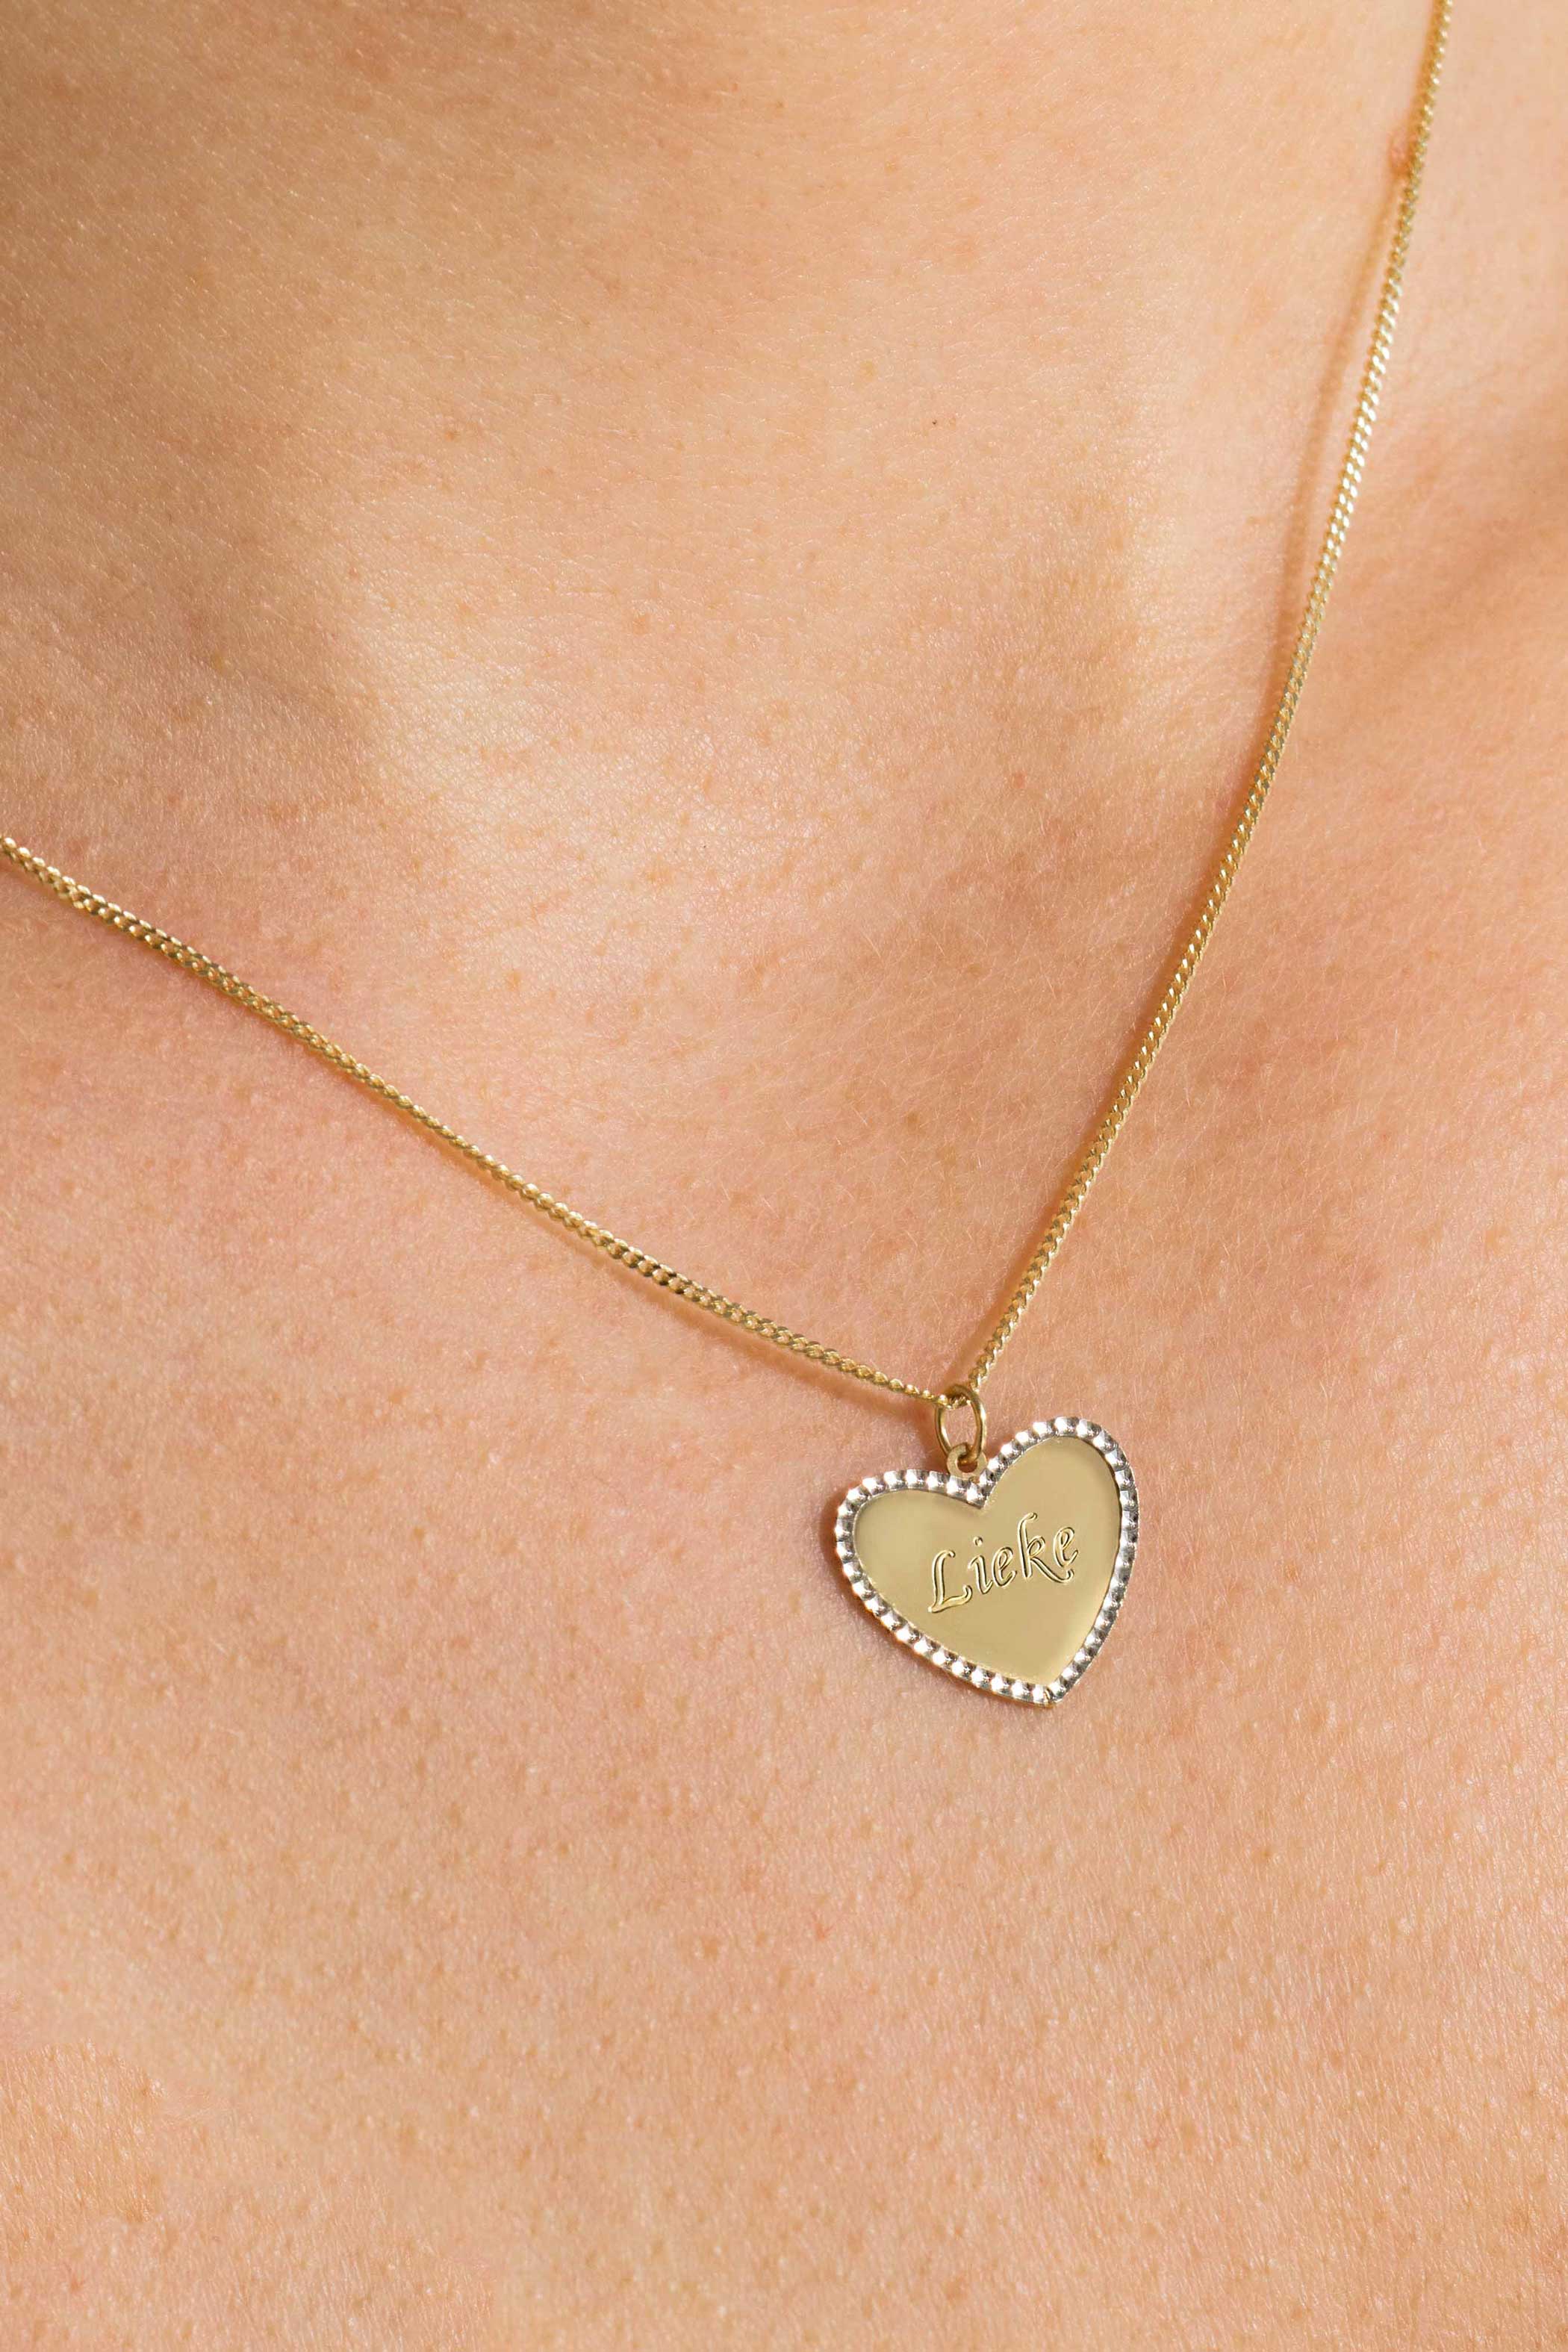 15mm ZINZI 14K Gold Pendant Shiny Heart with White Gold Pearls ZGH364-15 (excl. necklace)